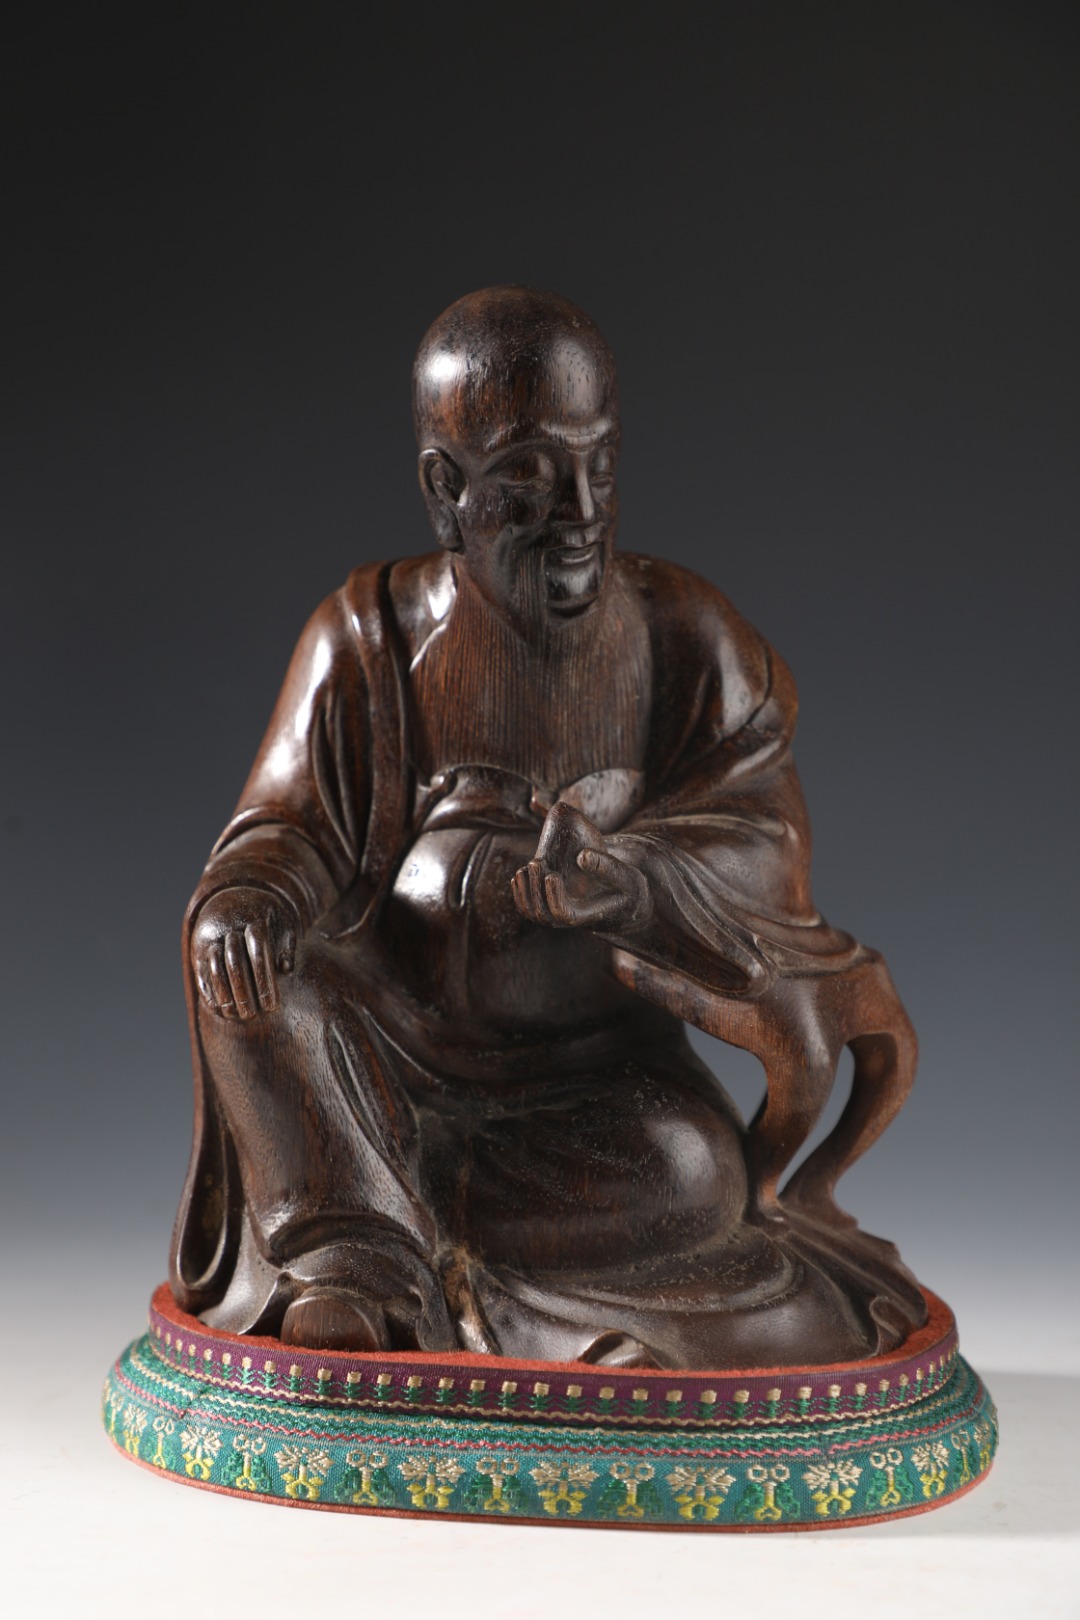 Qing Dynasty: Precious sunk old agarwood medicine fairy seated statue - Image 2 of 9